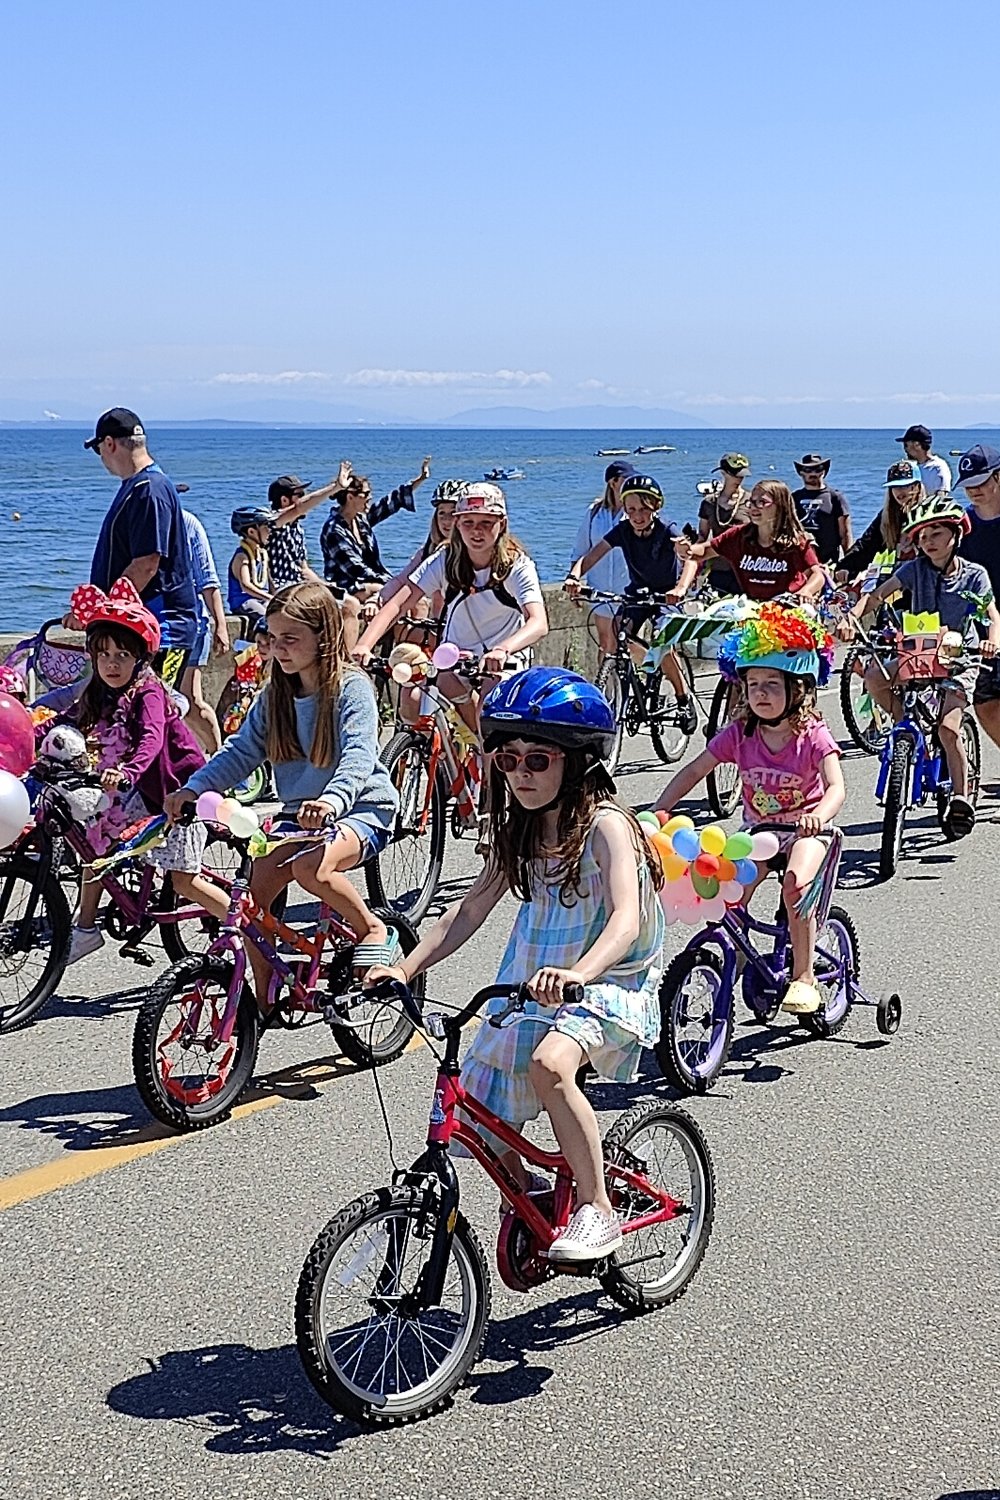 July’s hot weather got everyone out to the beach. The Maple Beach Bike Parade brought out around 50 young cyclists on July 23. Sweet Water Ice Cream truck was on hand to help everyone cool off. On July 1 the Delta Police Pipe Band performed at the border separating Centennial Beach, Tsawwassen and Maple Beach, Point Roberts.